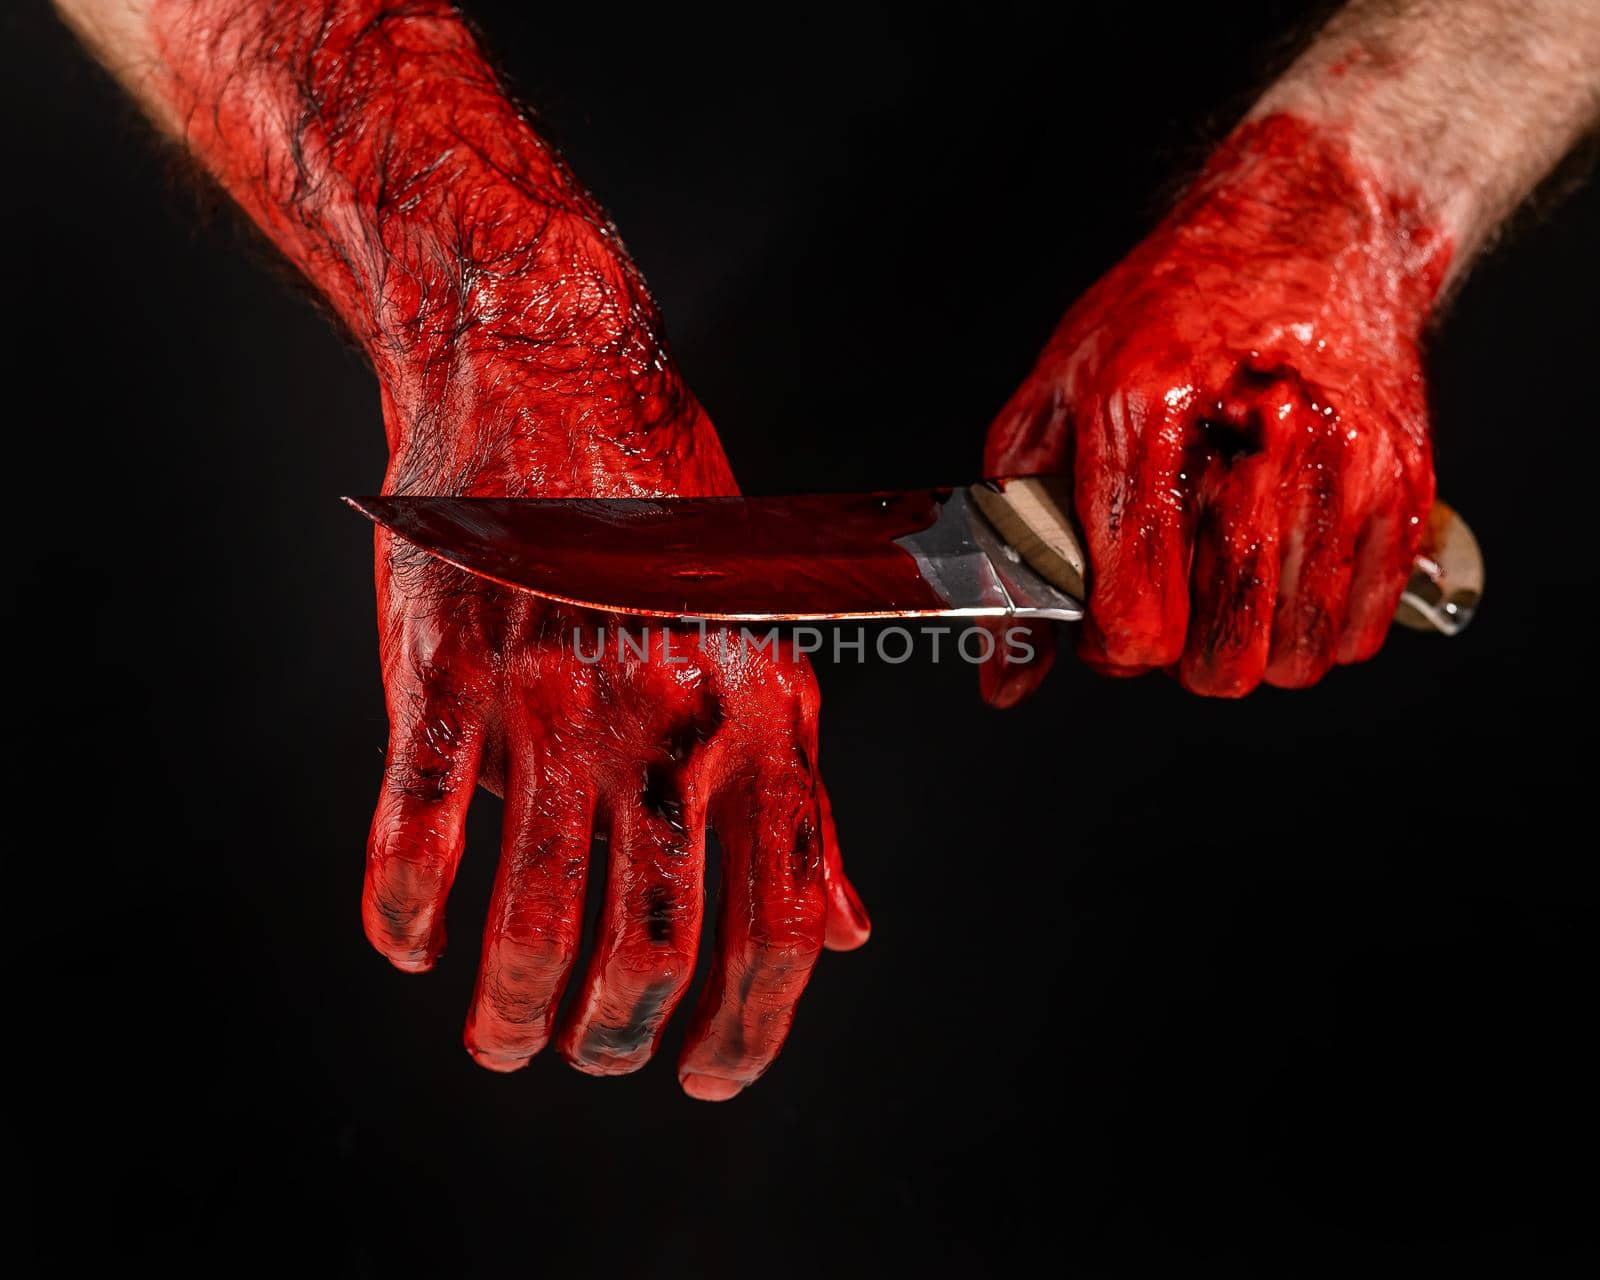 Man holding knife with bloody hand on black background